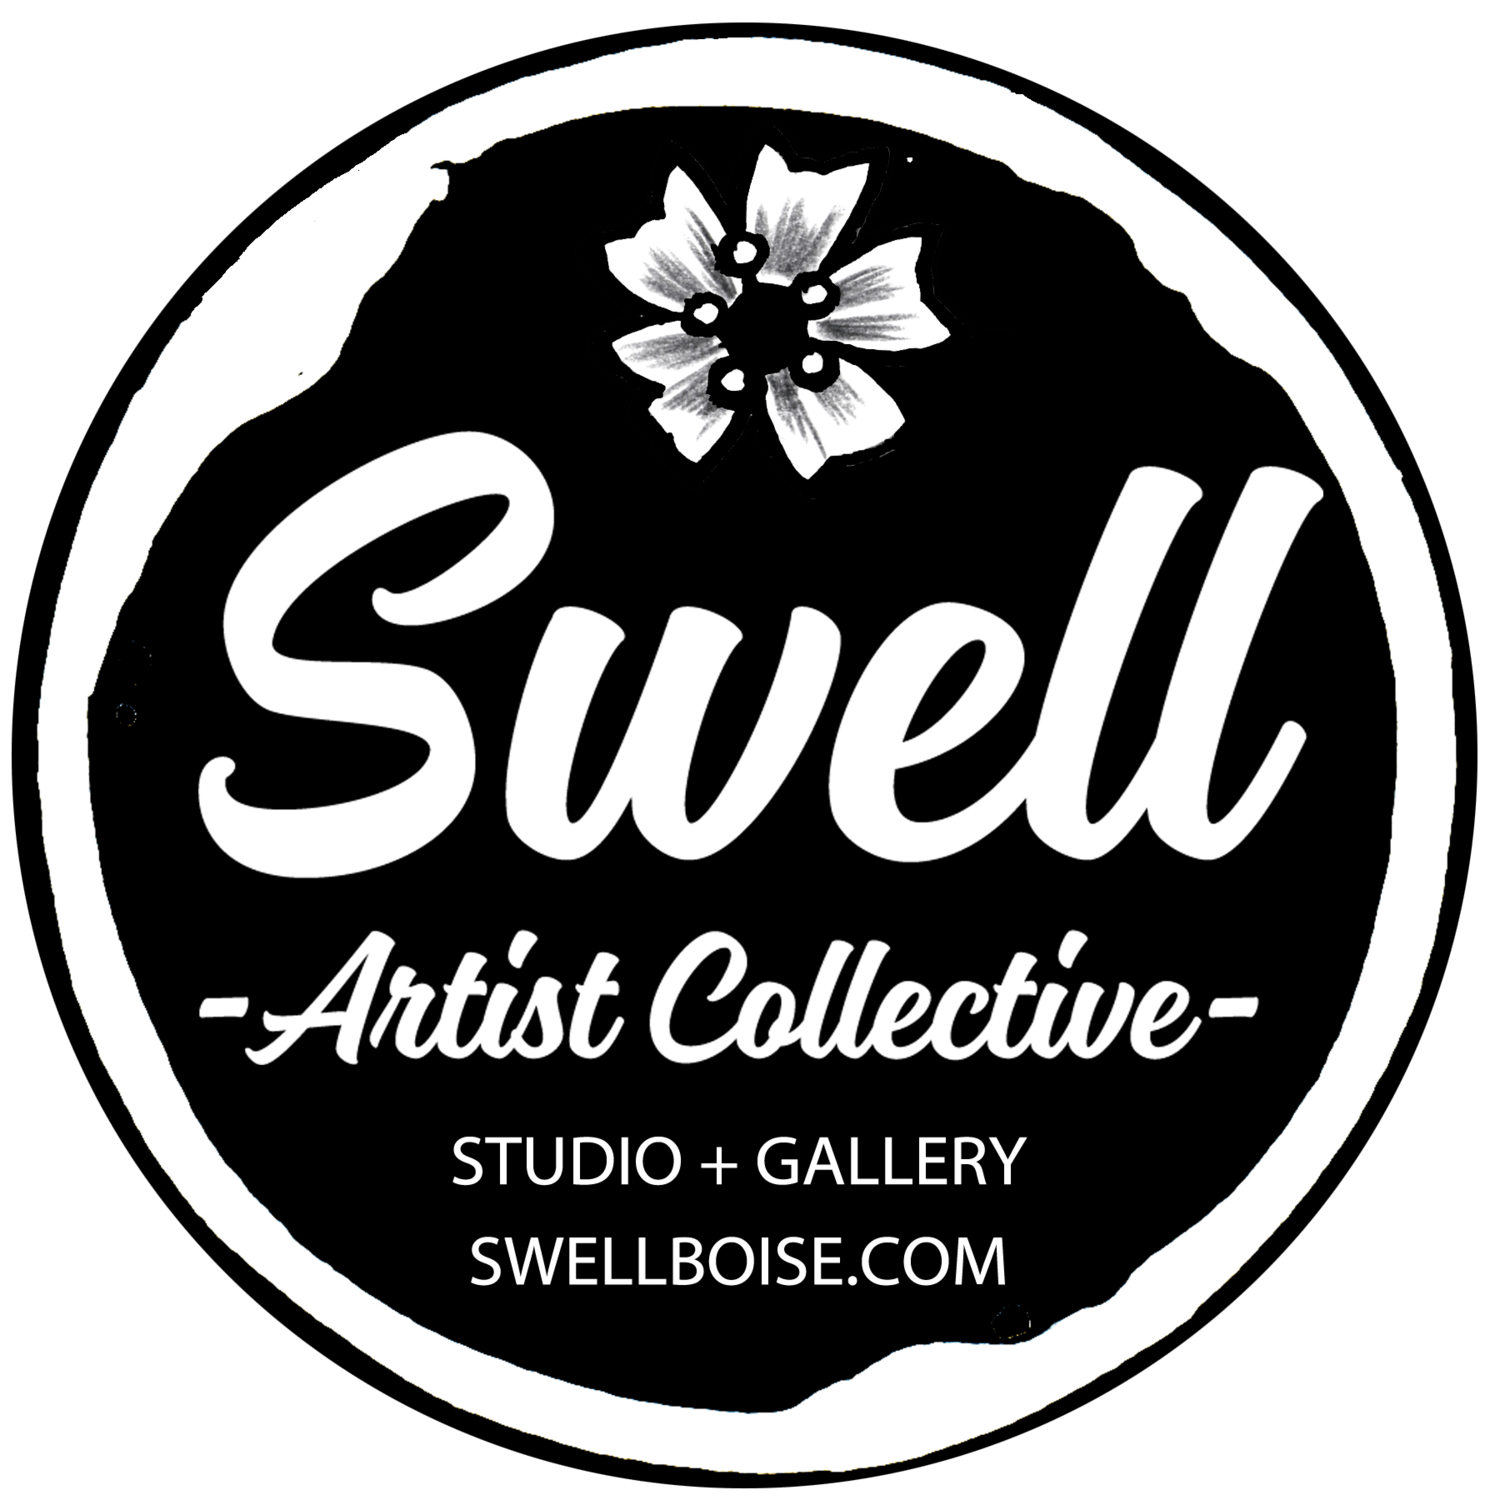 Swell Logo - Swell Artist Collective